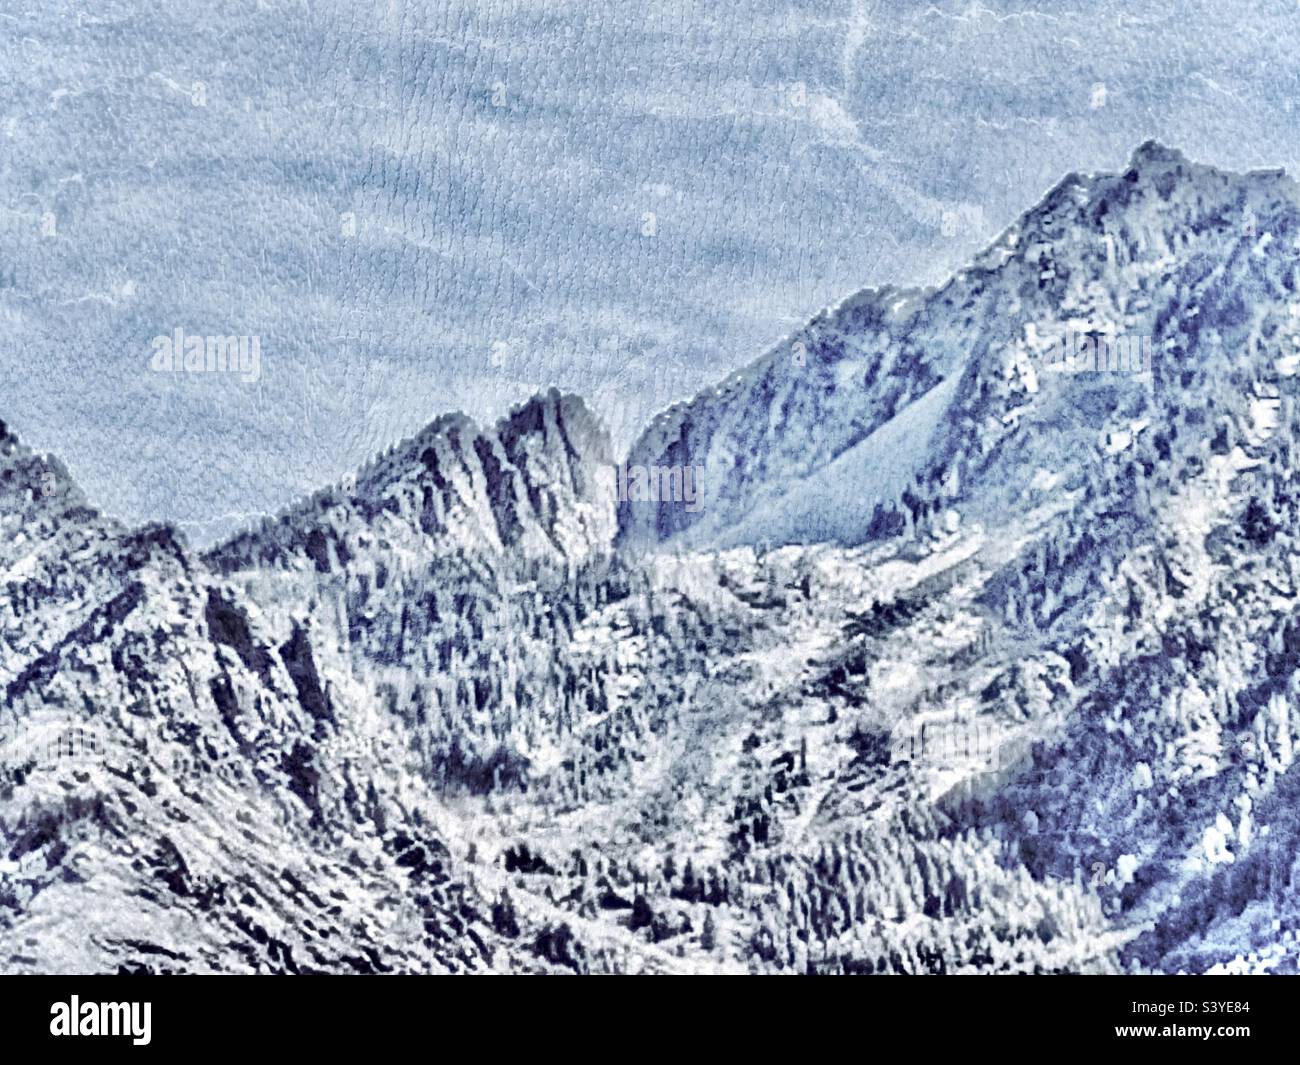 A grungy, textured rendering of a photo of the snow covered Wasatch Mountains lying east of the Salt Lake valley of Utah, USA. These are further south of the SLC metro area. White, rugged beauty. Stock Photo